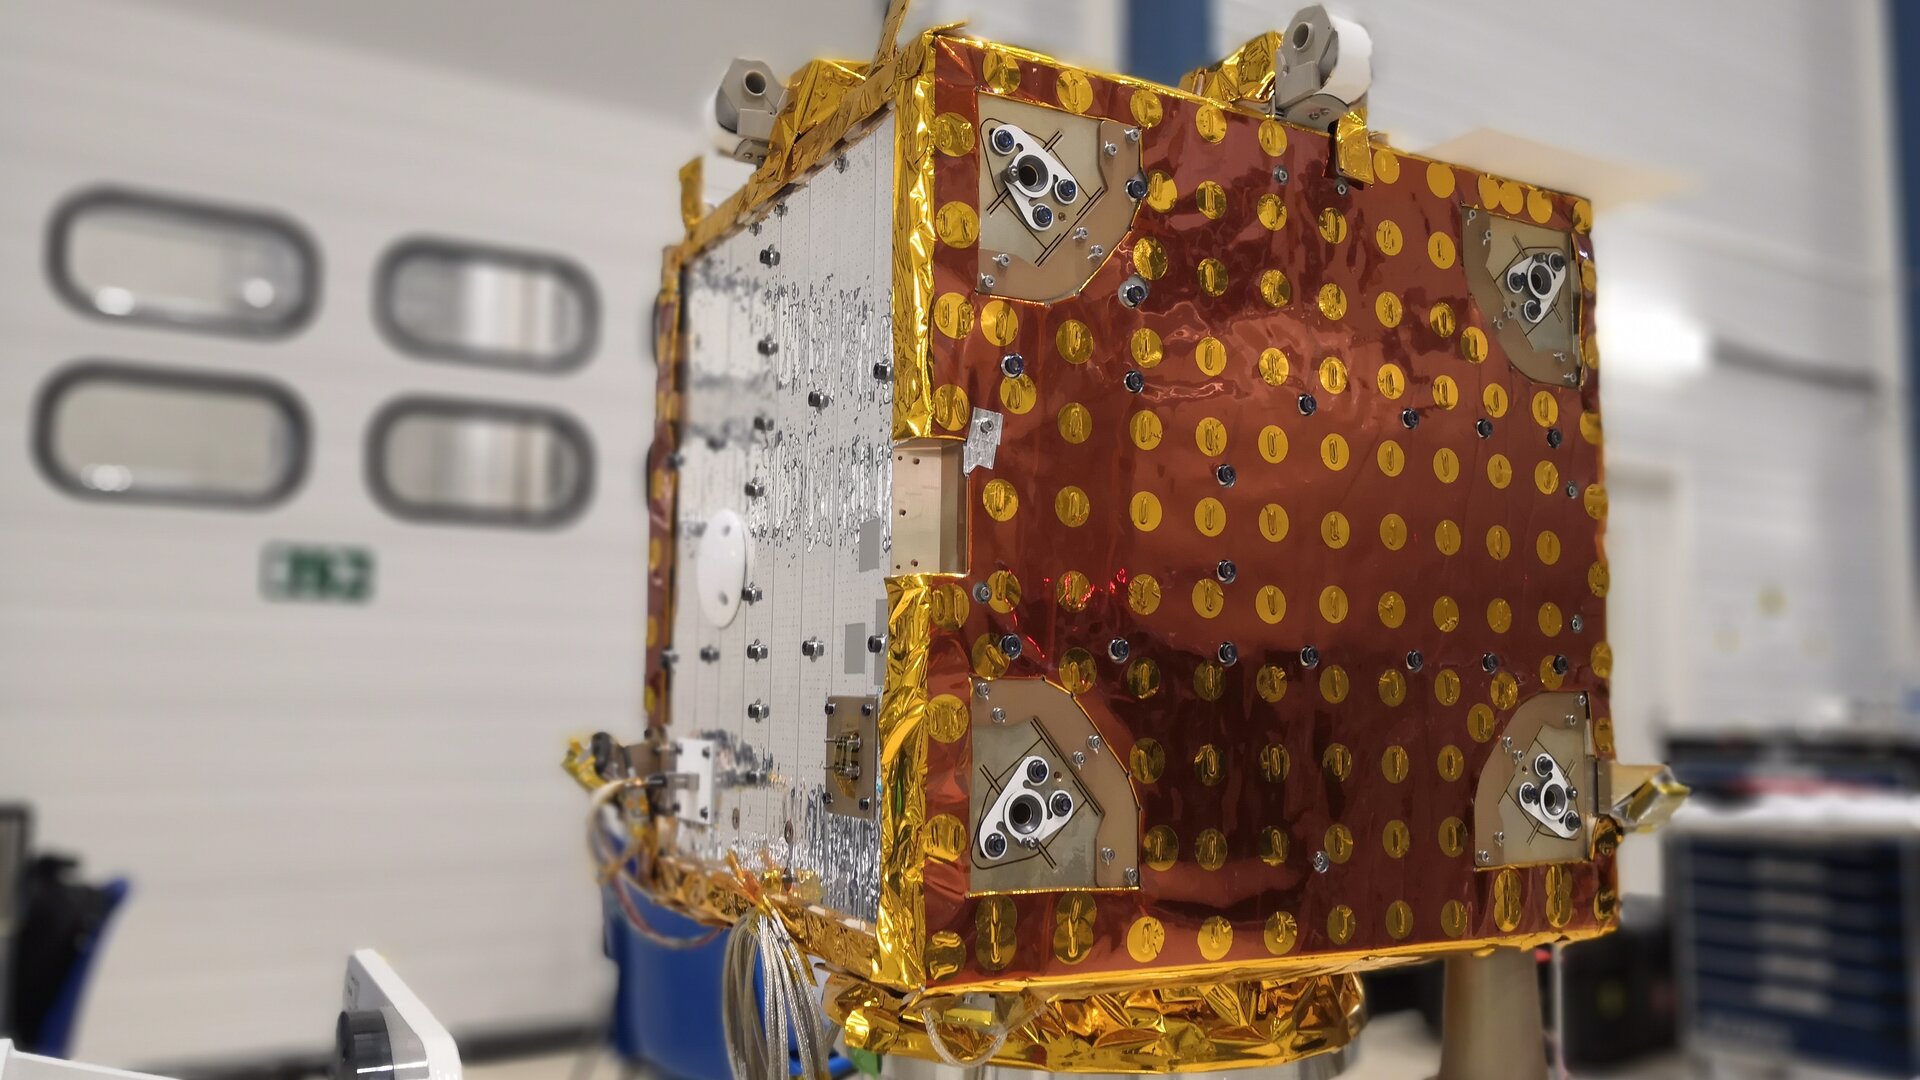 The microsatellite has completed its environmental tests at Centre Spatial de Liège